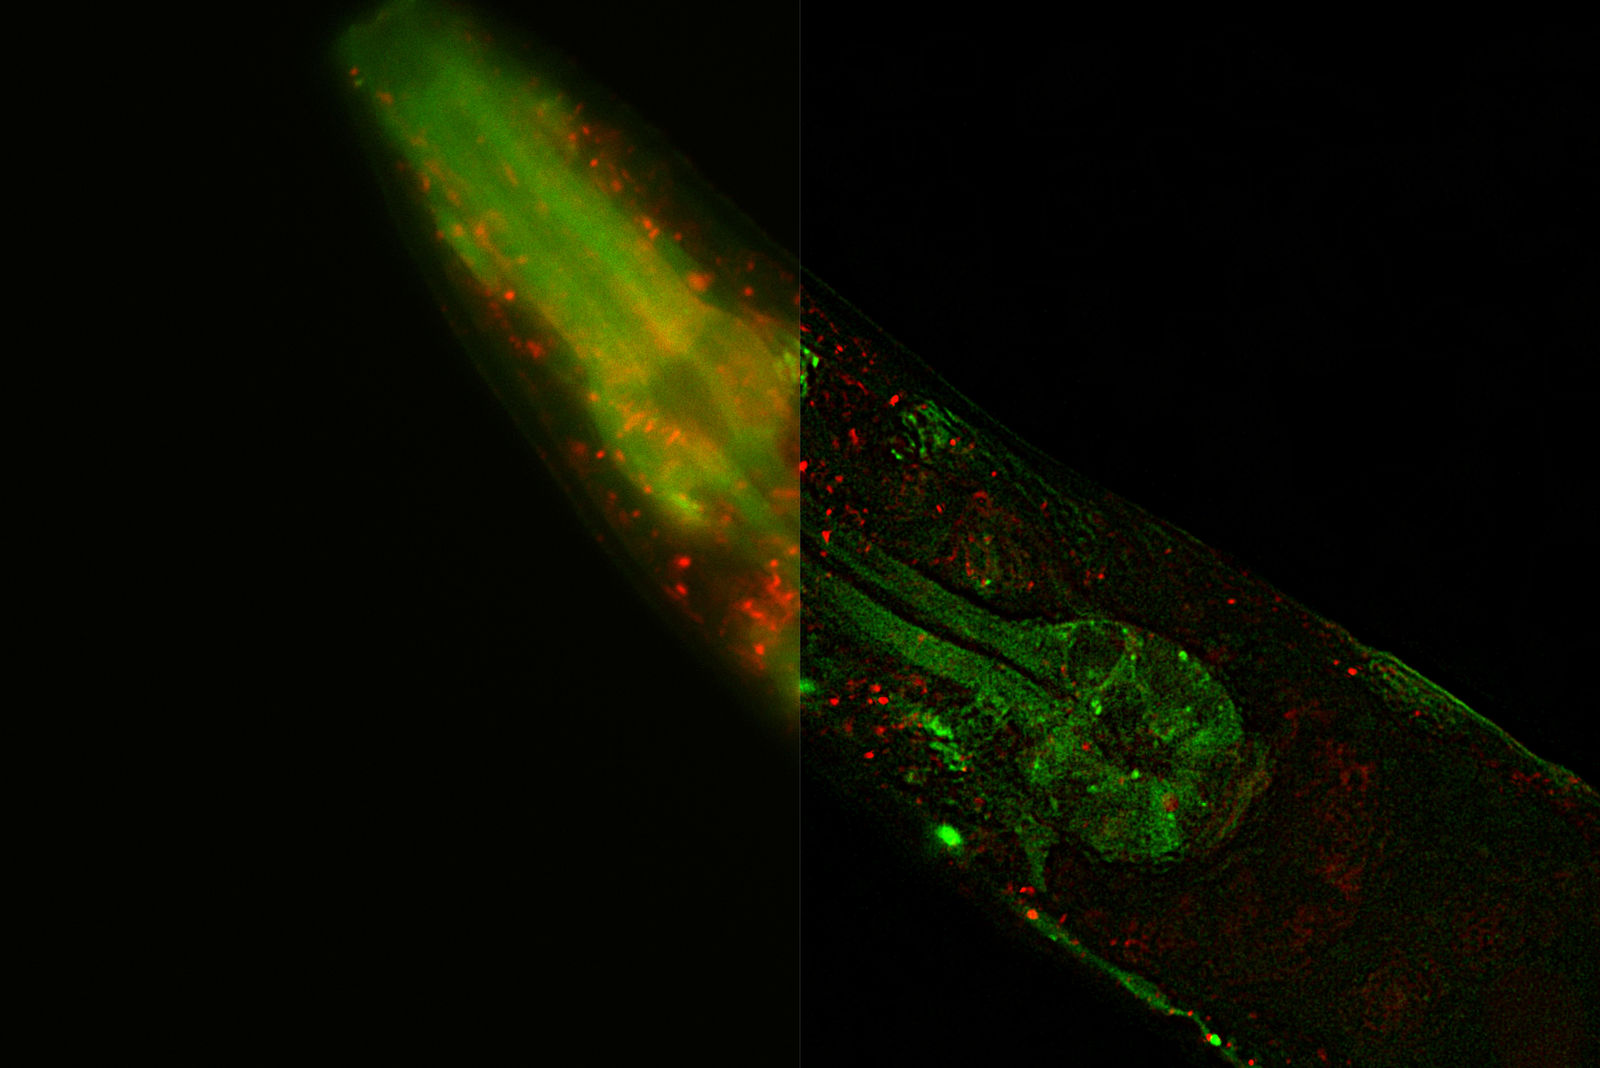 This strain MAH215 (Chang et al., Elife, 2017) is a dual-fluorescent mCherry::GFP::LGG-1 protein to monitor autophagic flux in C. elegans by visualizing both autophagosomes (APs), as well as, autolysosomes (ALs). The green punctae (GFP) are APs while the ALs quench GFP in the acidic environment and emit only the mCherry signal. Image courtesy of Dr. Aditi U. Gurkar, University of Pittsburgh, PA, USA